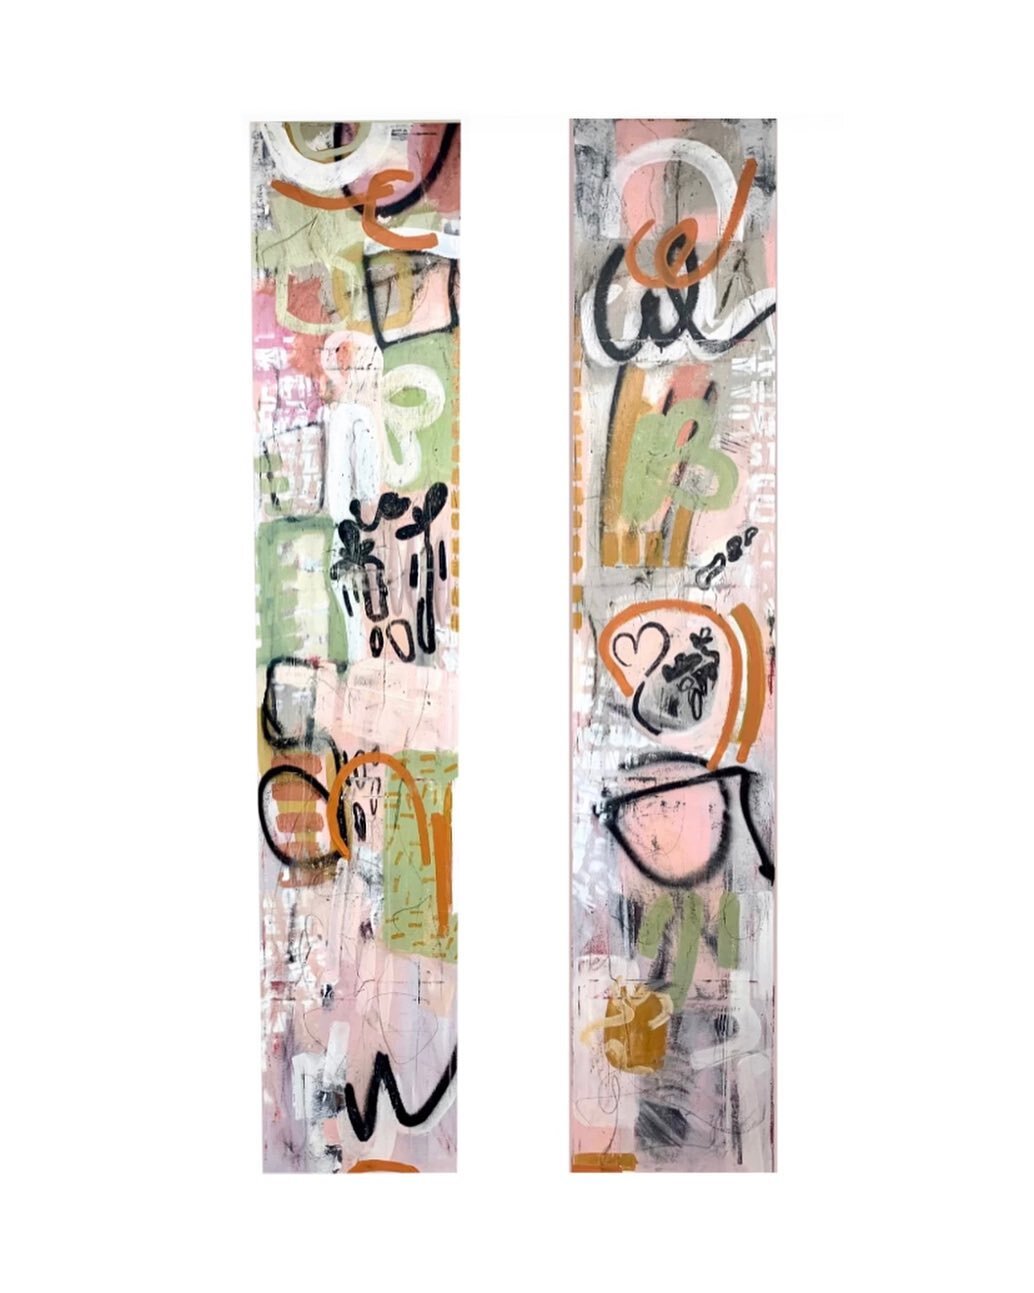 Kicking off the weekend with these two! &quot;Regeneration 1 and 2&quot; are 15.5&quot; x 77&quot; mixed media on canvas. DM for pricing details!
.
.
.
#newart #artoftheday #arttoronto #torontoartist #modernart #contemporaryart #artistsoninstagram #i